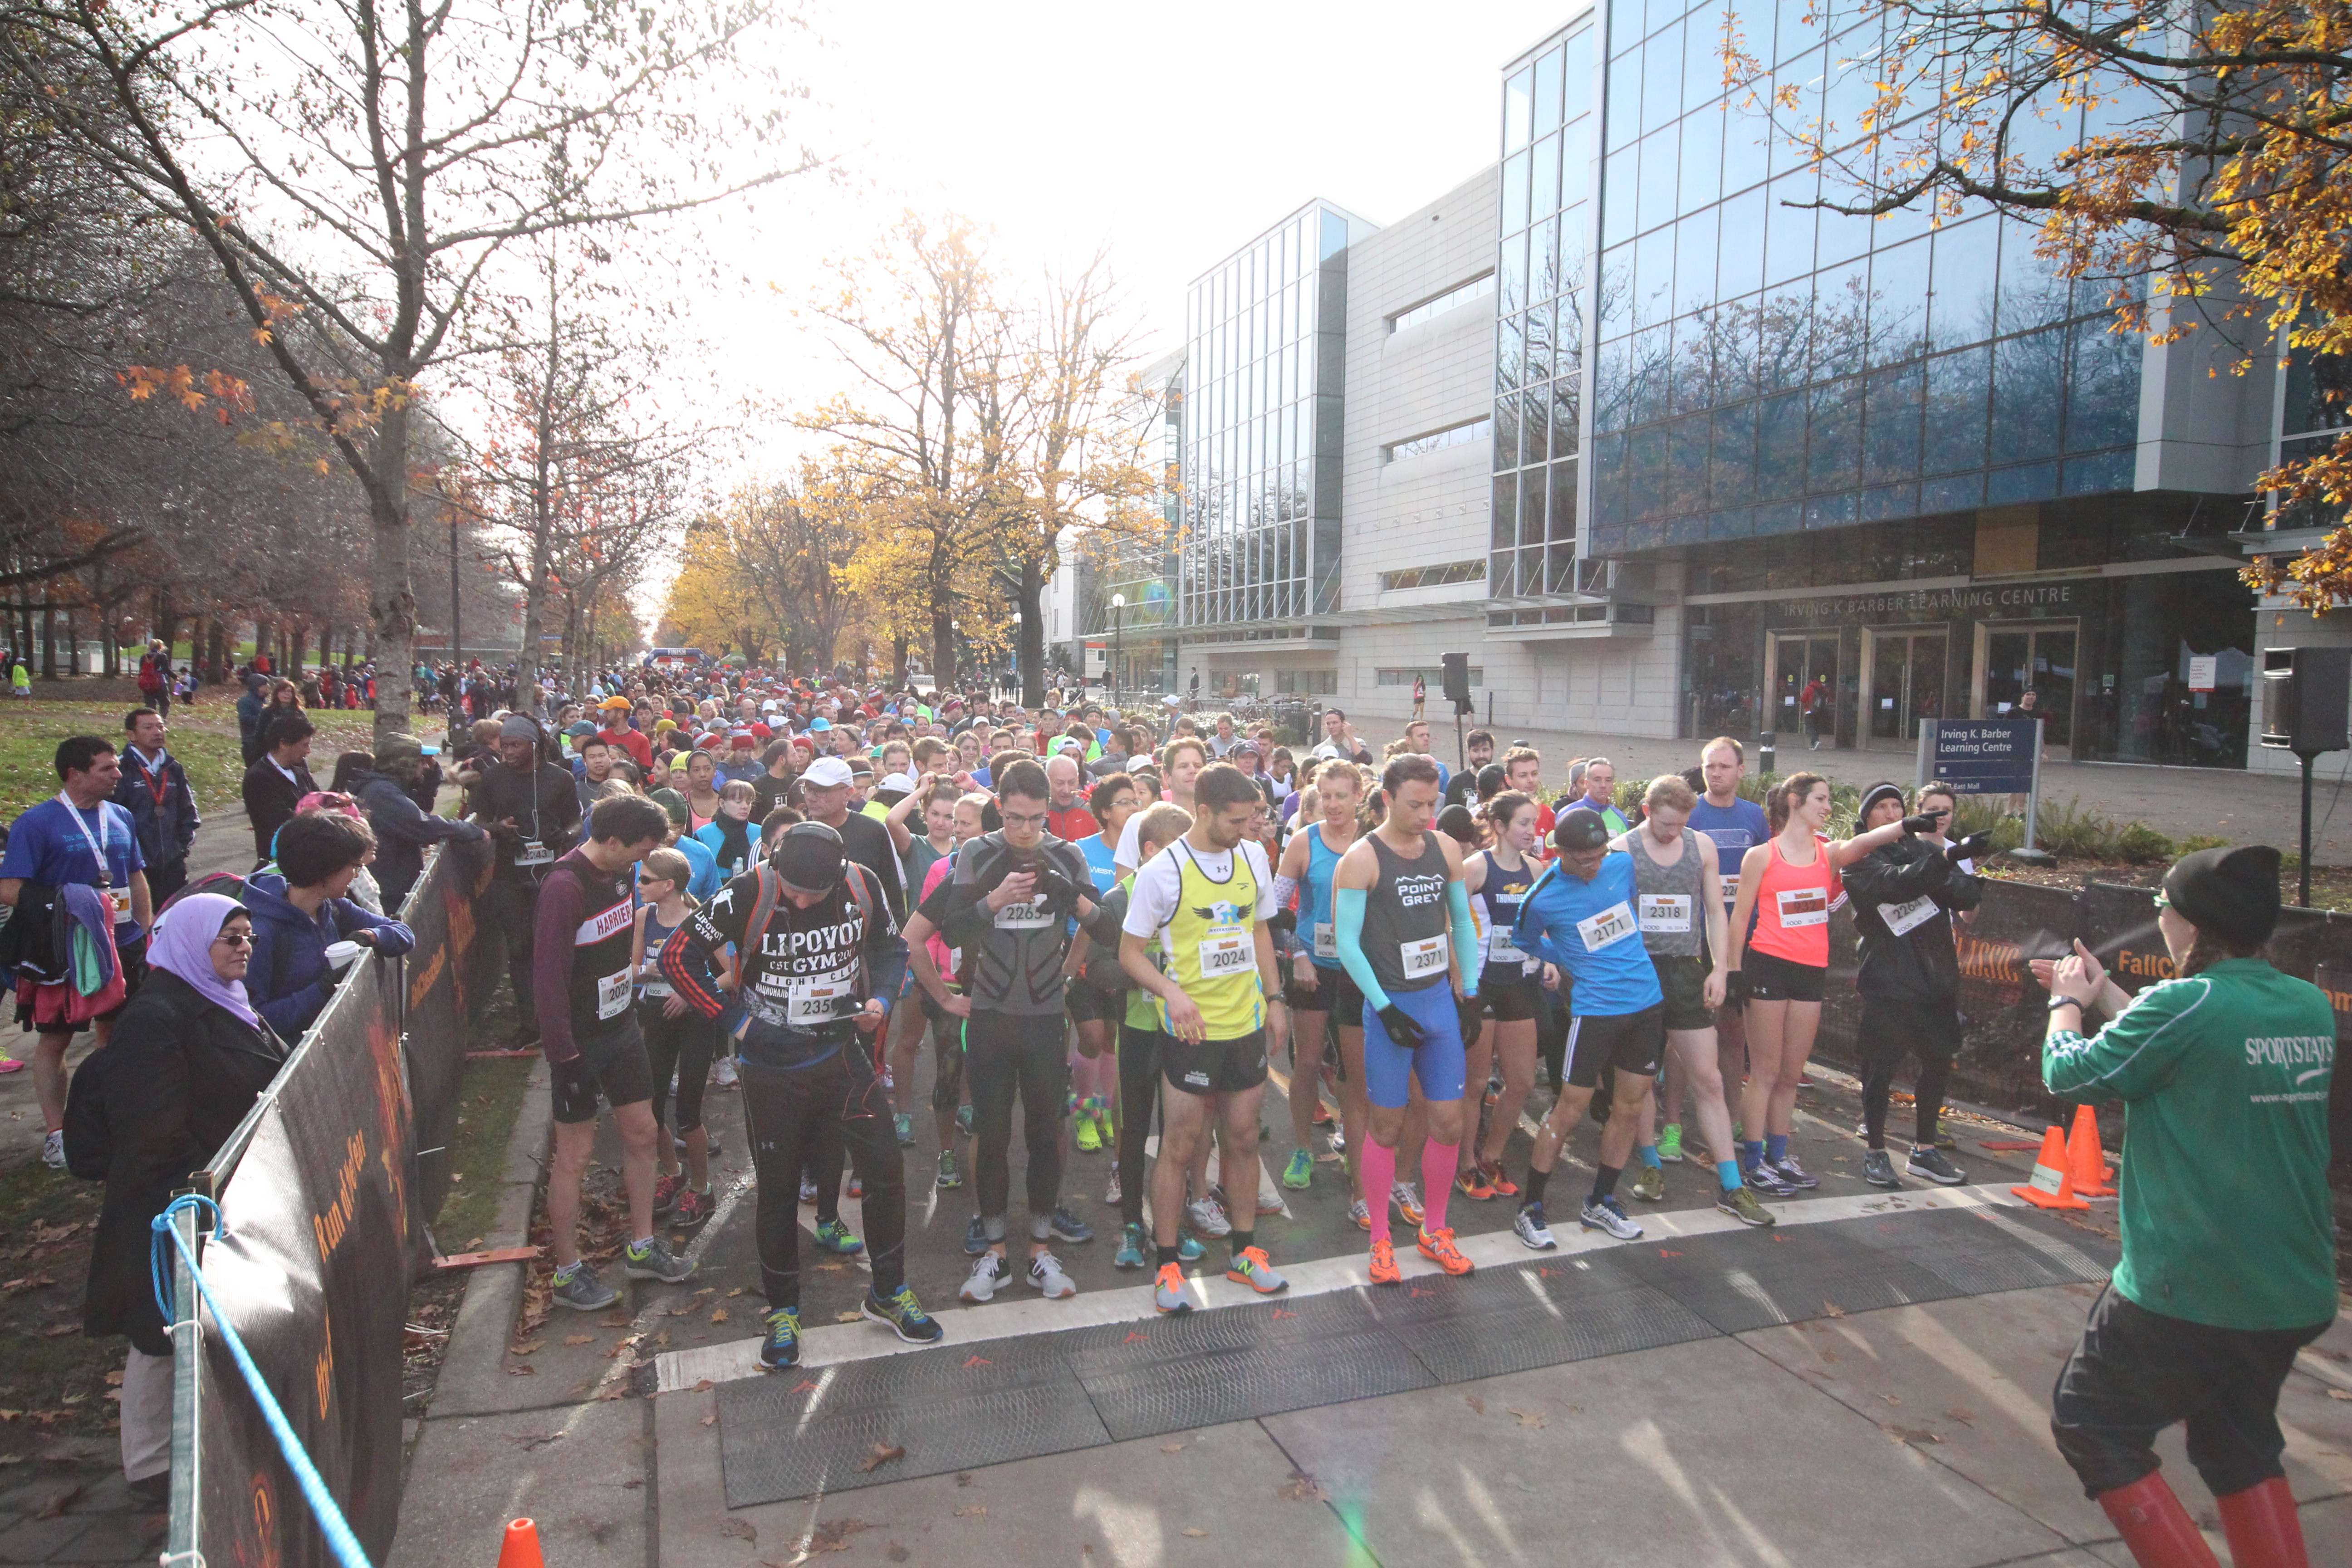 Sold-out Fall Classic concludes RUNVAN® race series for 2015